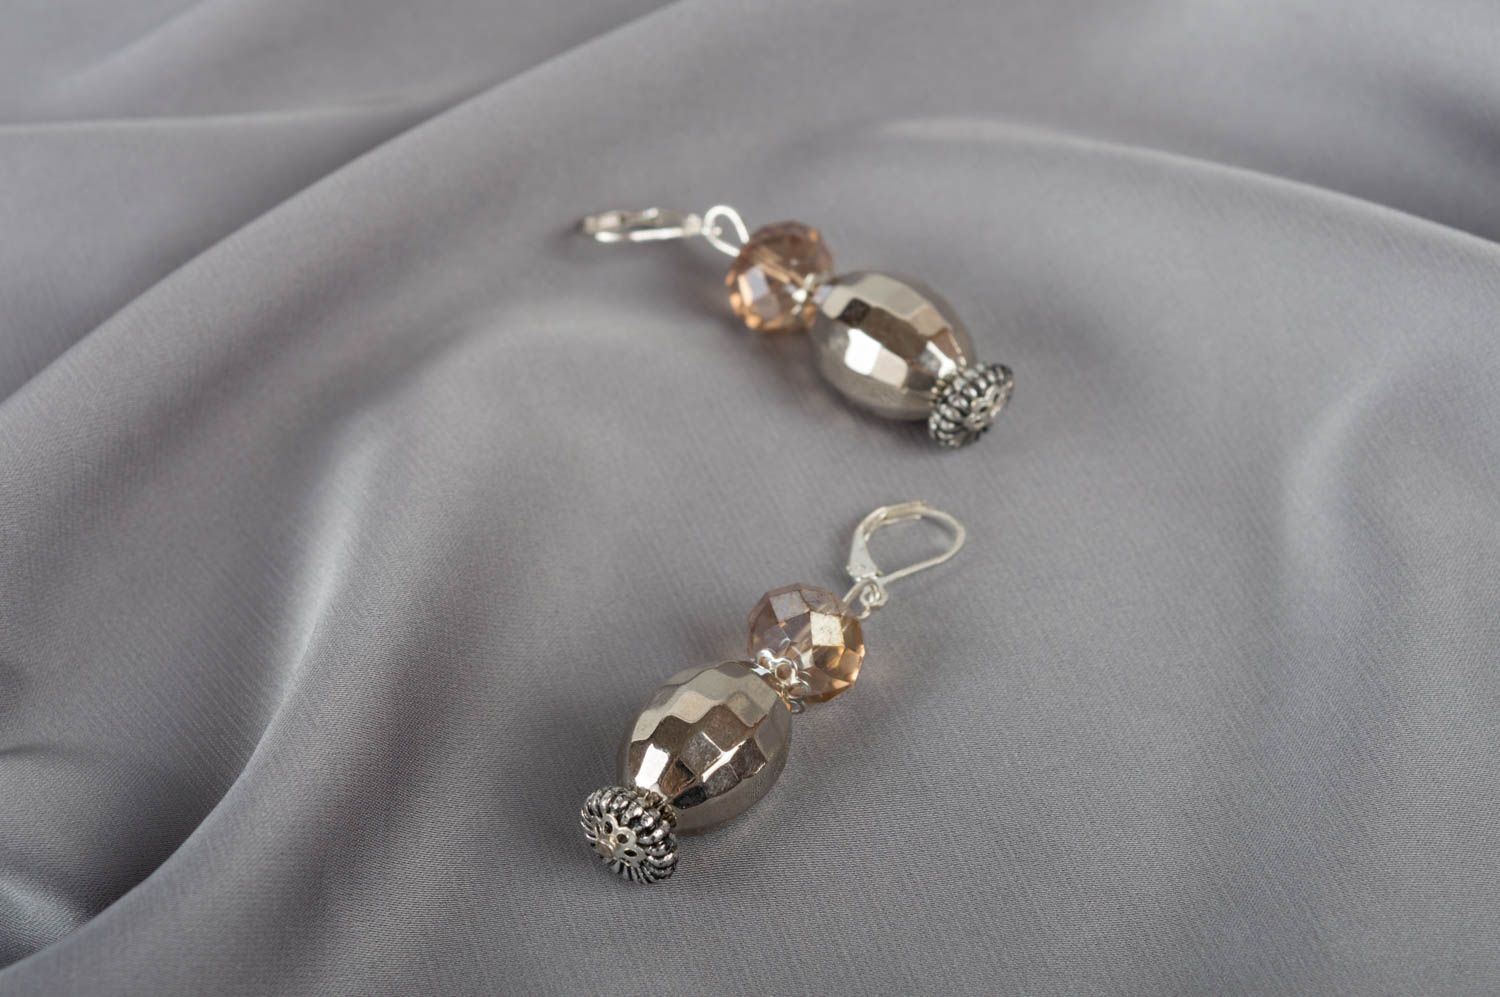 Stylish handmade crystal earrings designer earrings with beads gifts for her photo 1